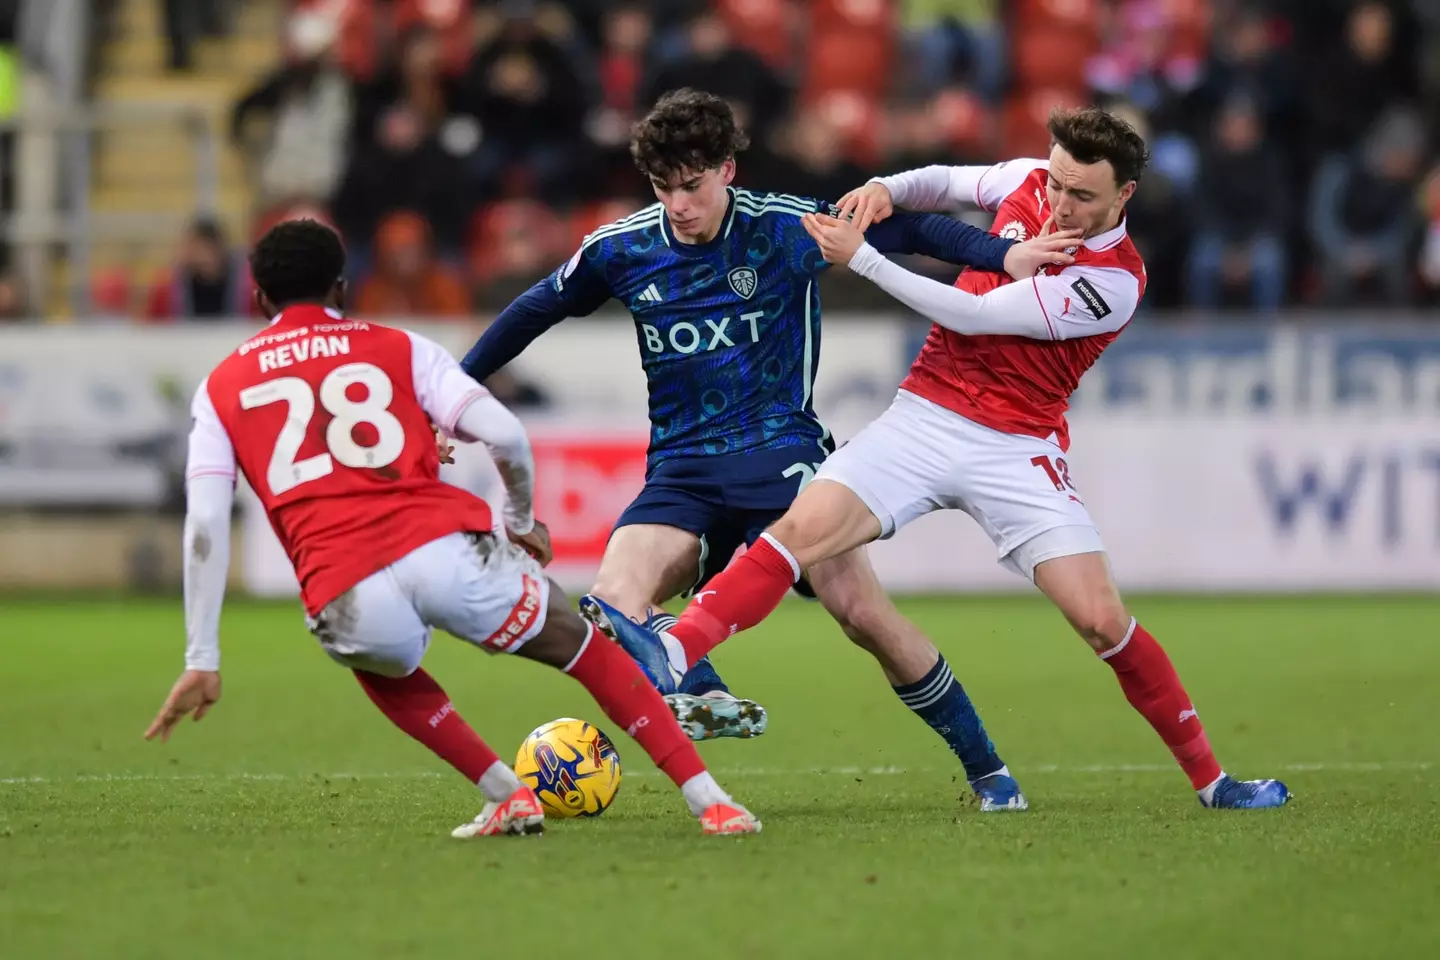 Gray in action against Rotherham United. (Image